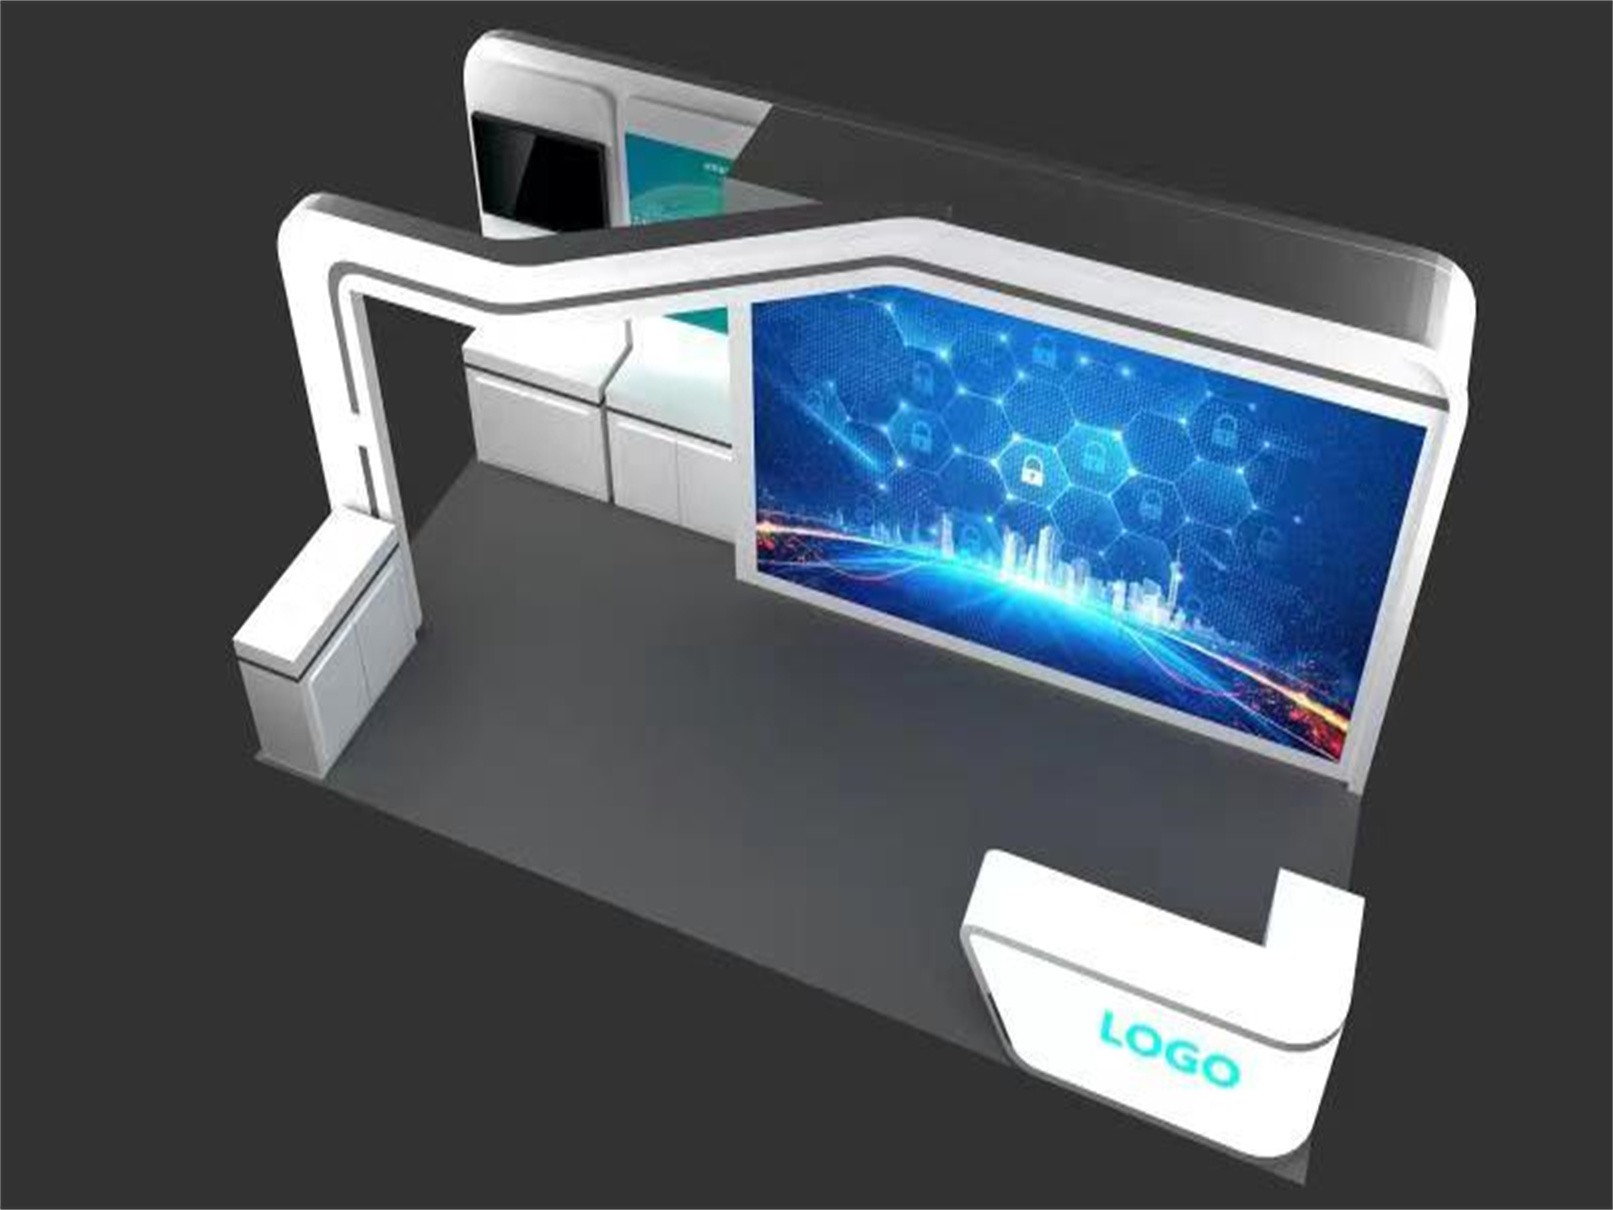 R33 10′ x 20′ Custom Trade Show Booth With LED Video Wall